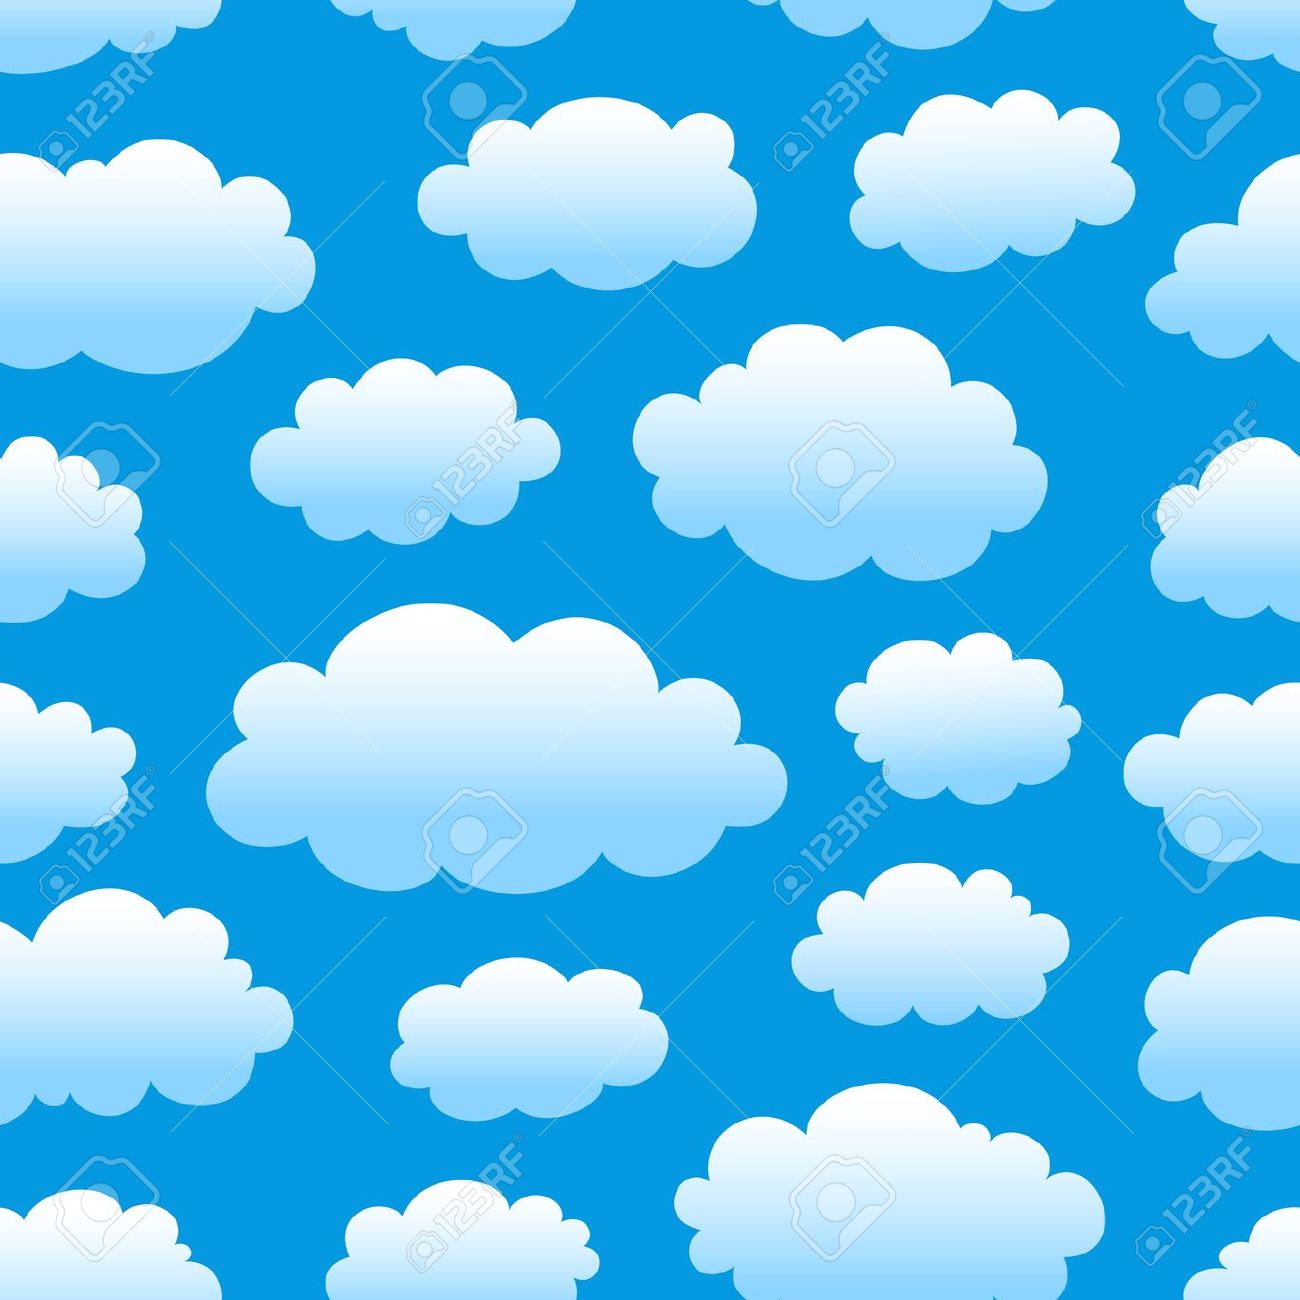 Blue sky with clouds clipart.